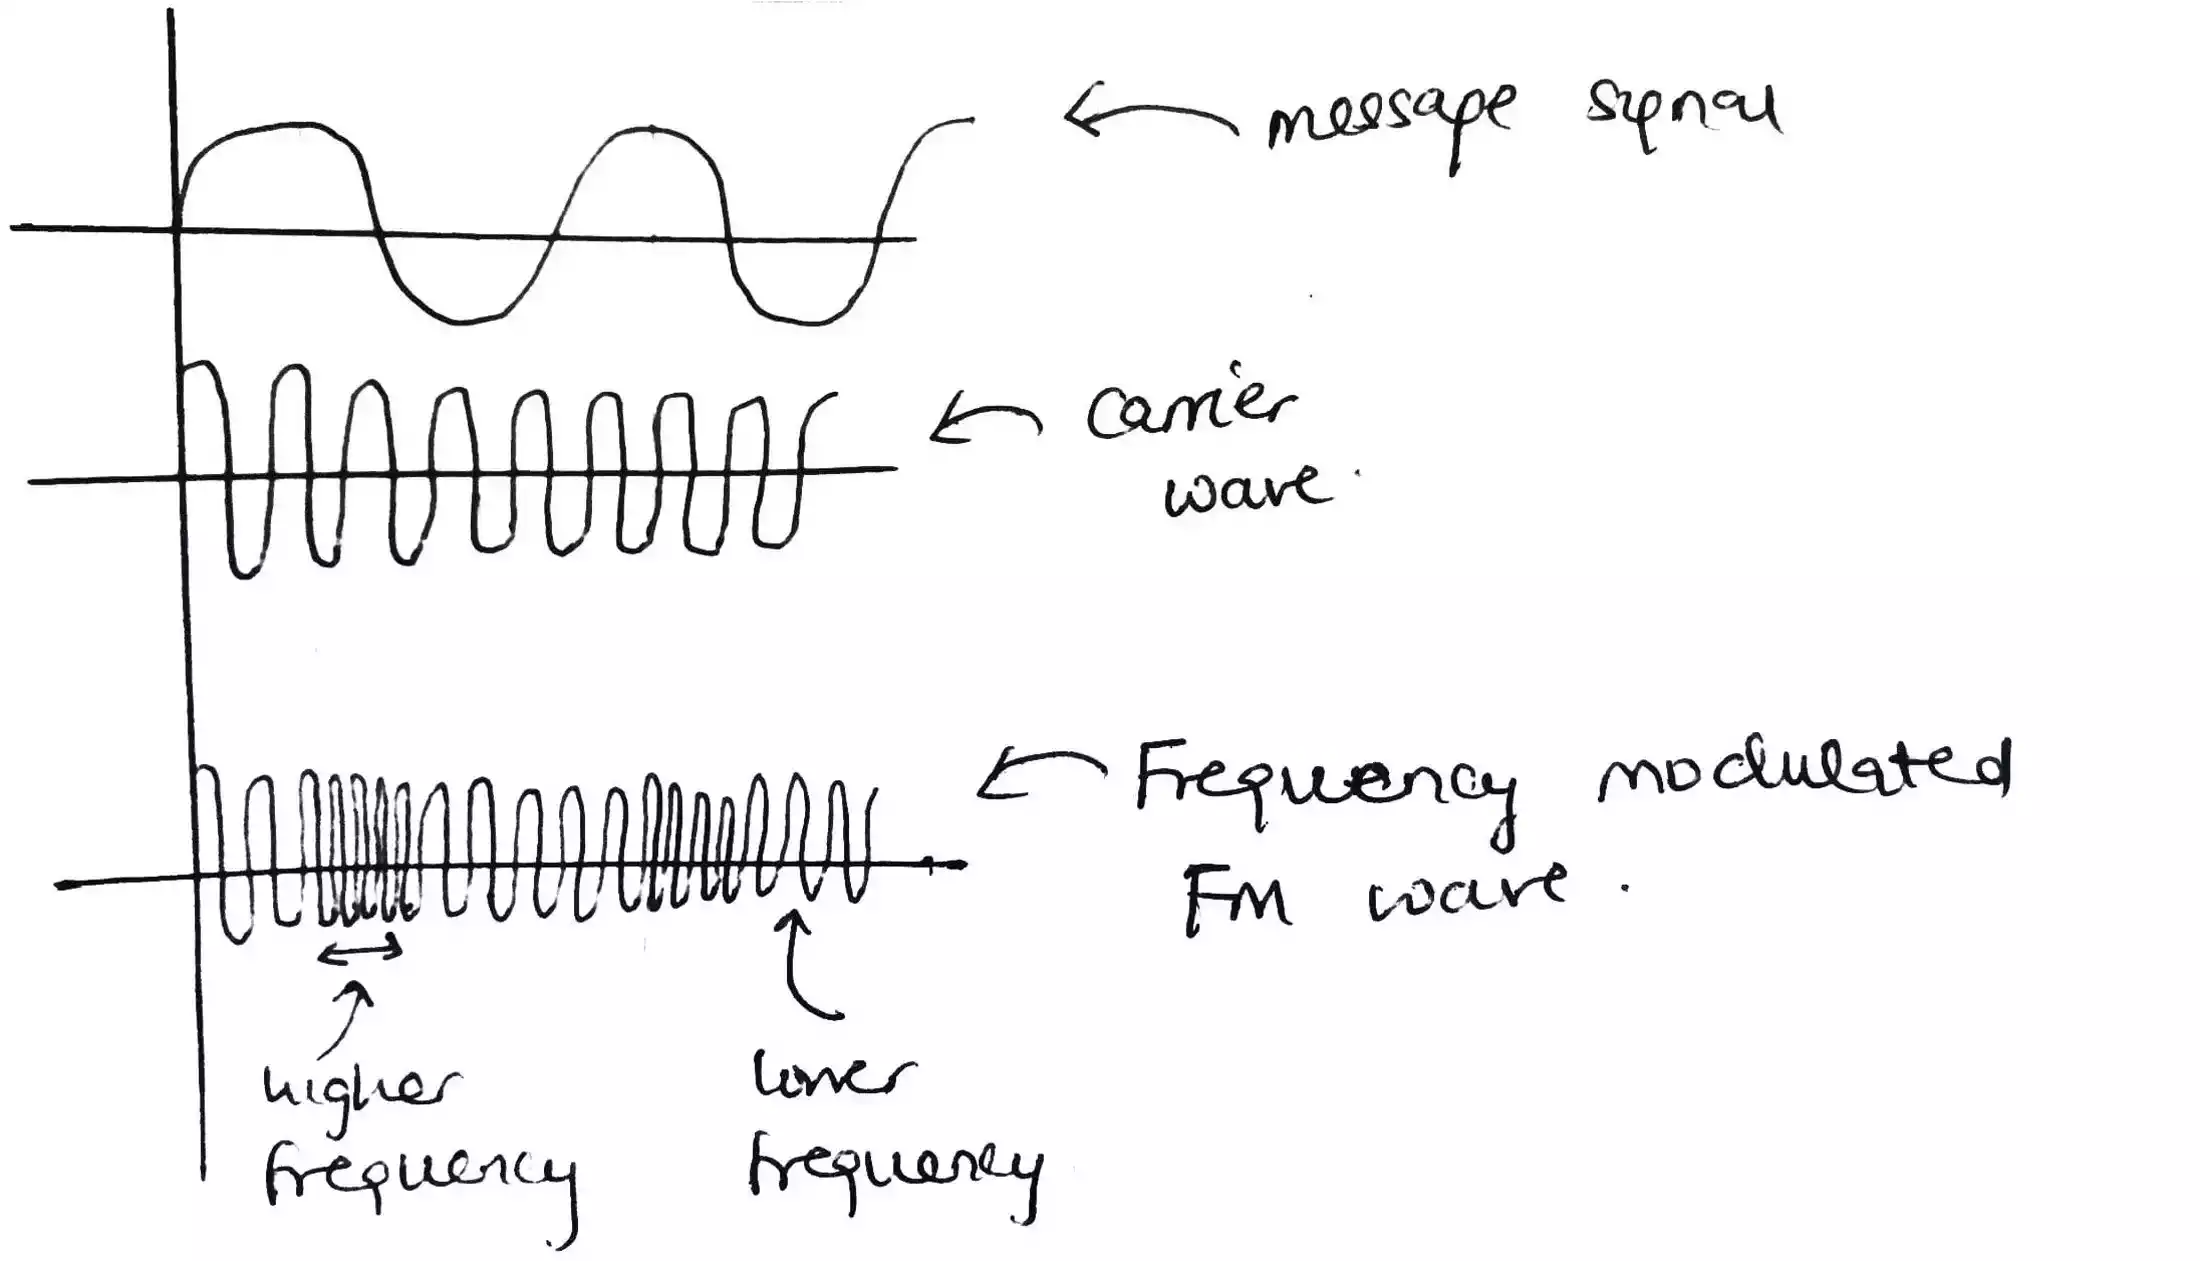 Frequency modulation